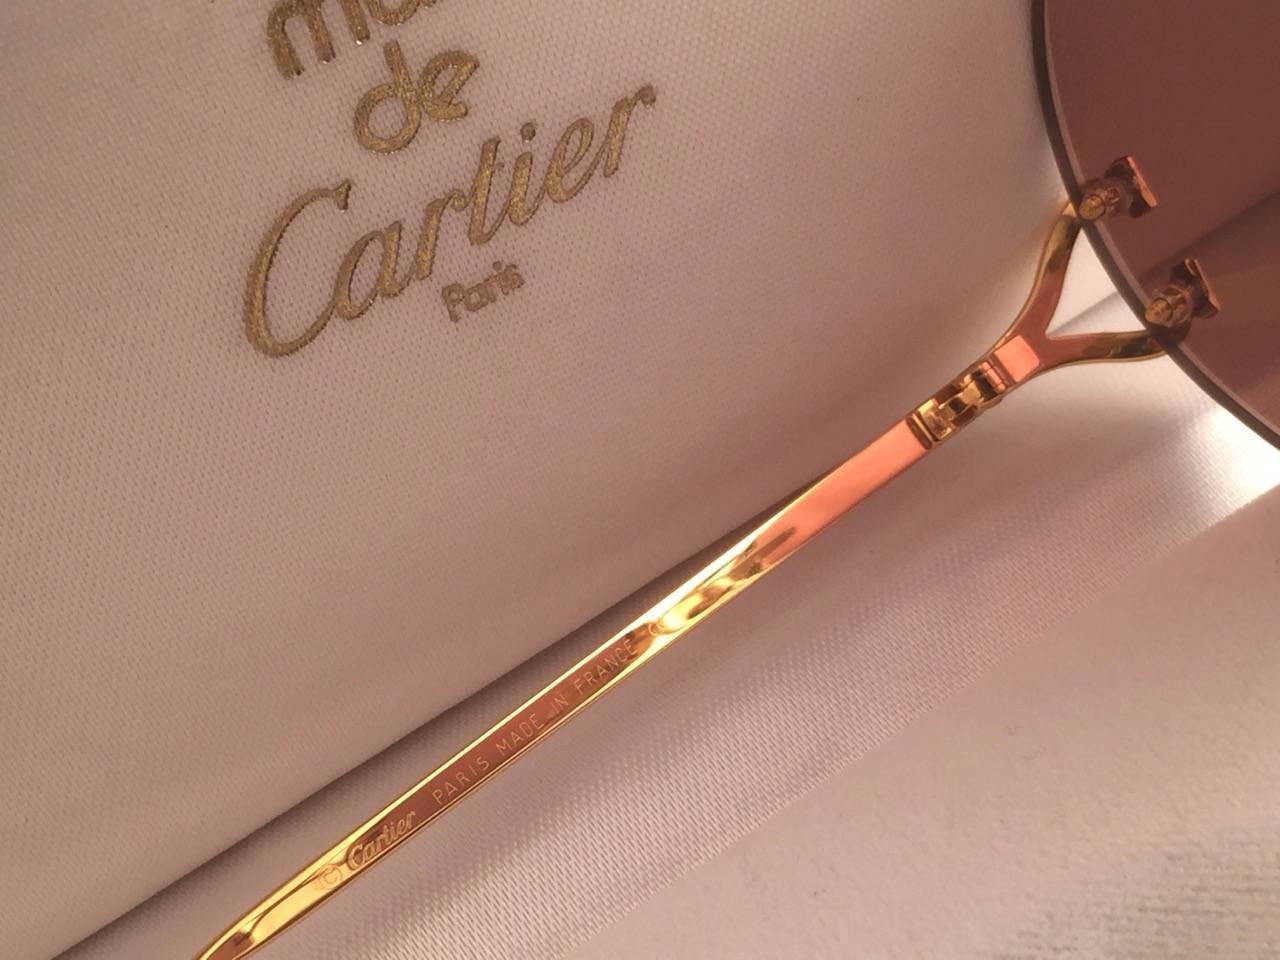 Cartier Madison Round Rimless Gold Brown Lens France Sunglasses In New Condition For Sale In Baleares, Baleares